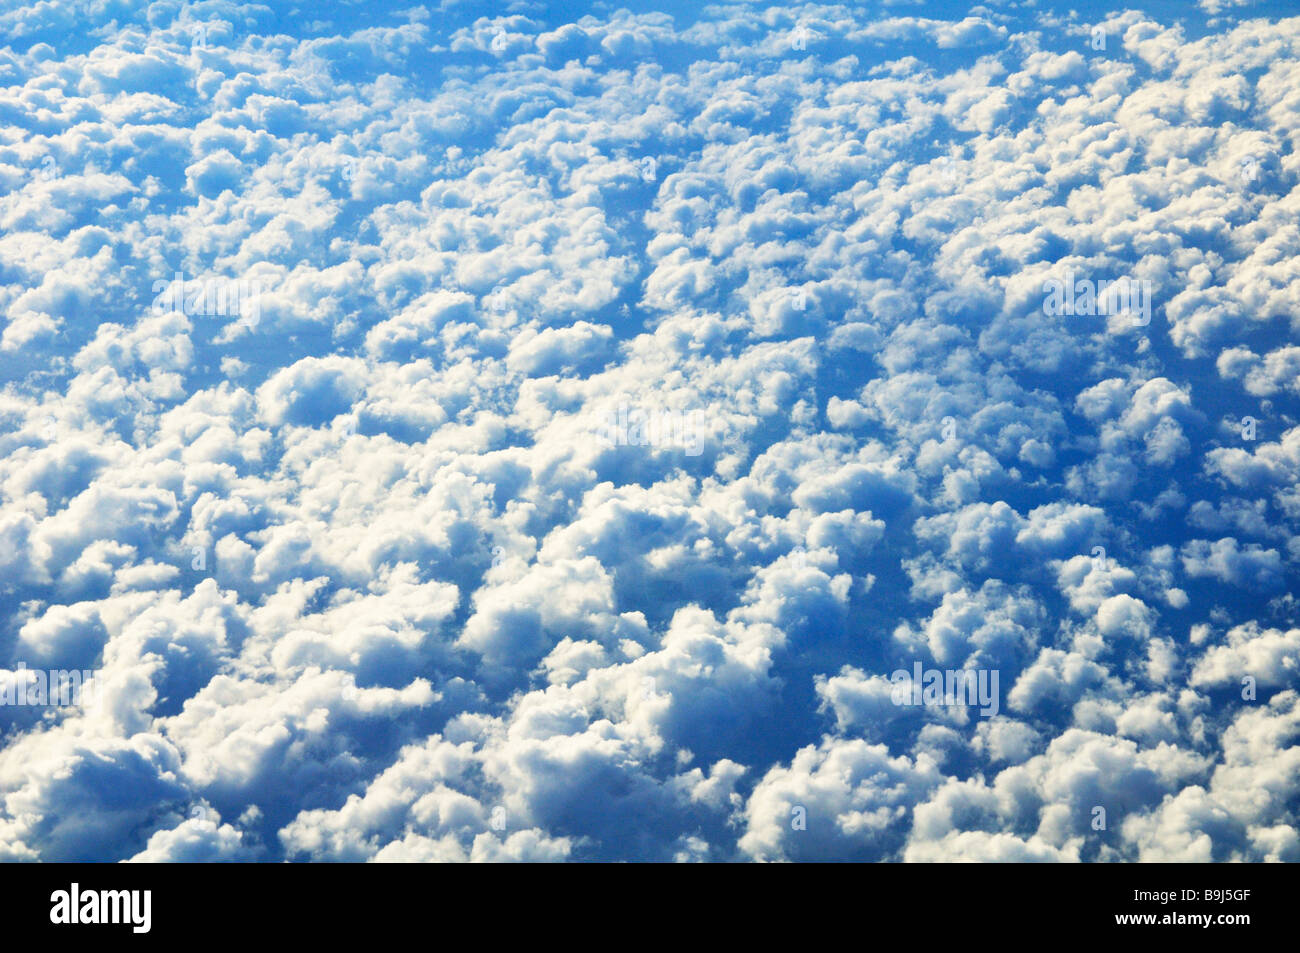 Clouds seen from above Stock Photo